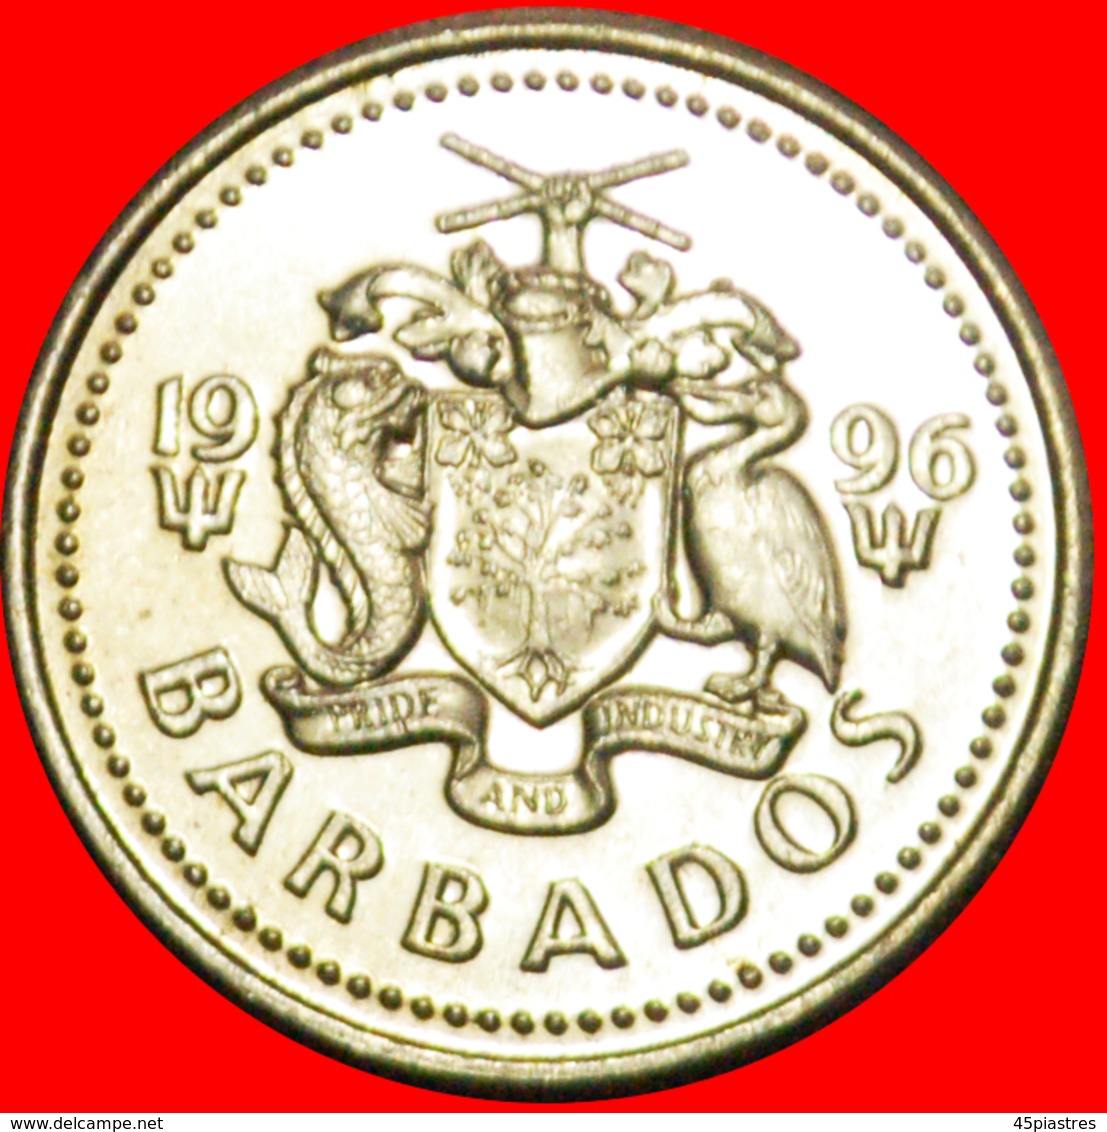 + GREAT BRITAIN (1973-2005): BARBADOS ★ 10 CENTS 1996 MINT LUSTER★DISCOVERY COIN! LOW START ★ NO RESERVE! - Barbades